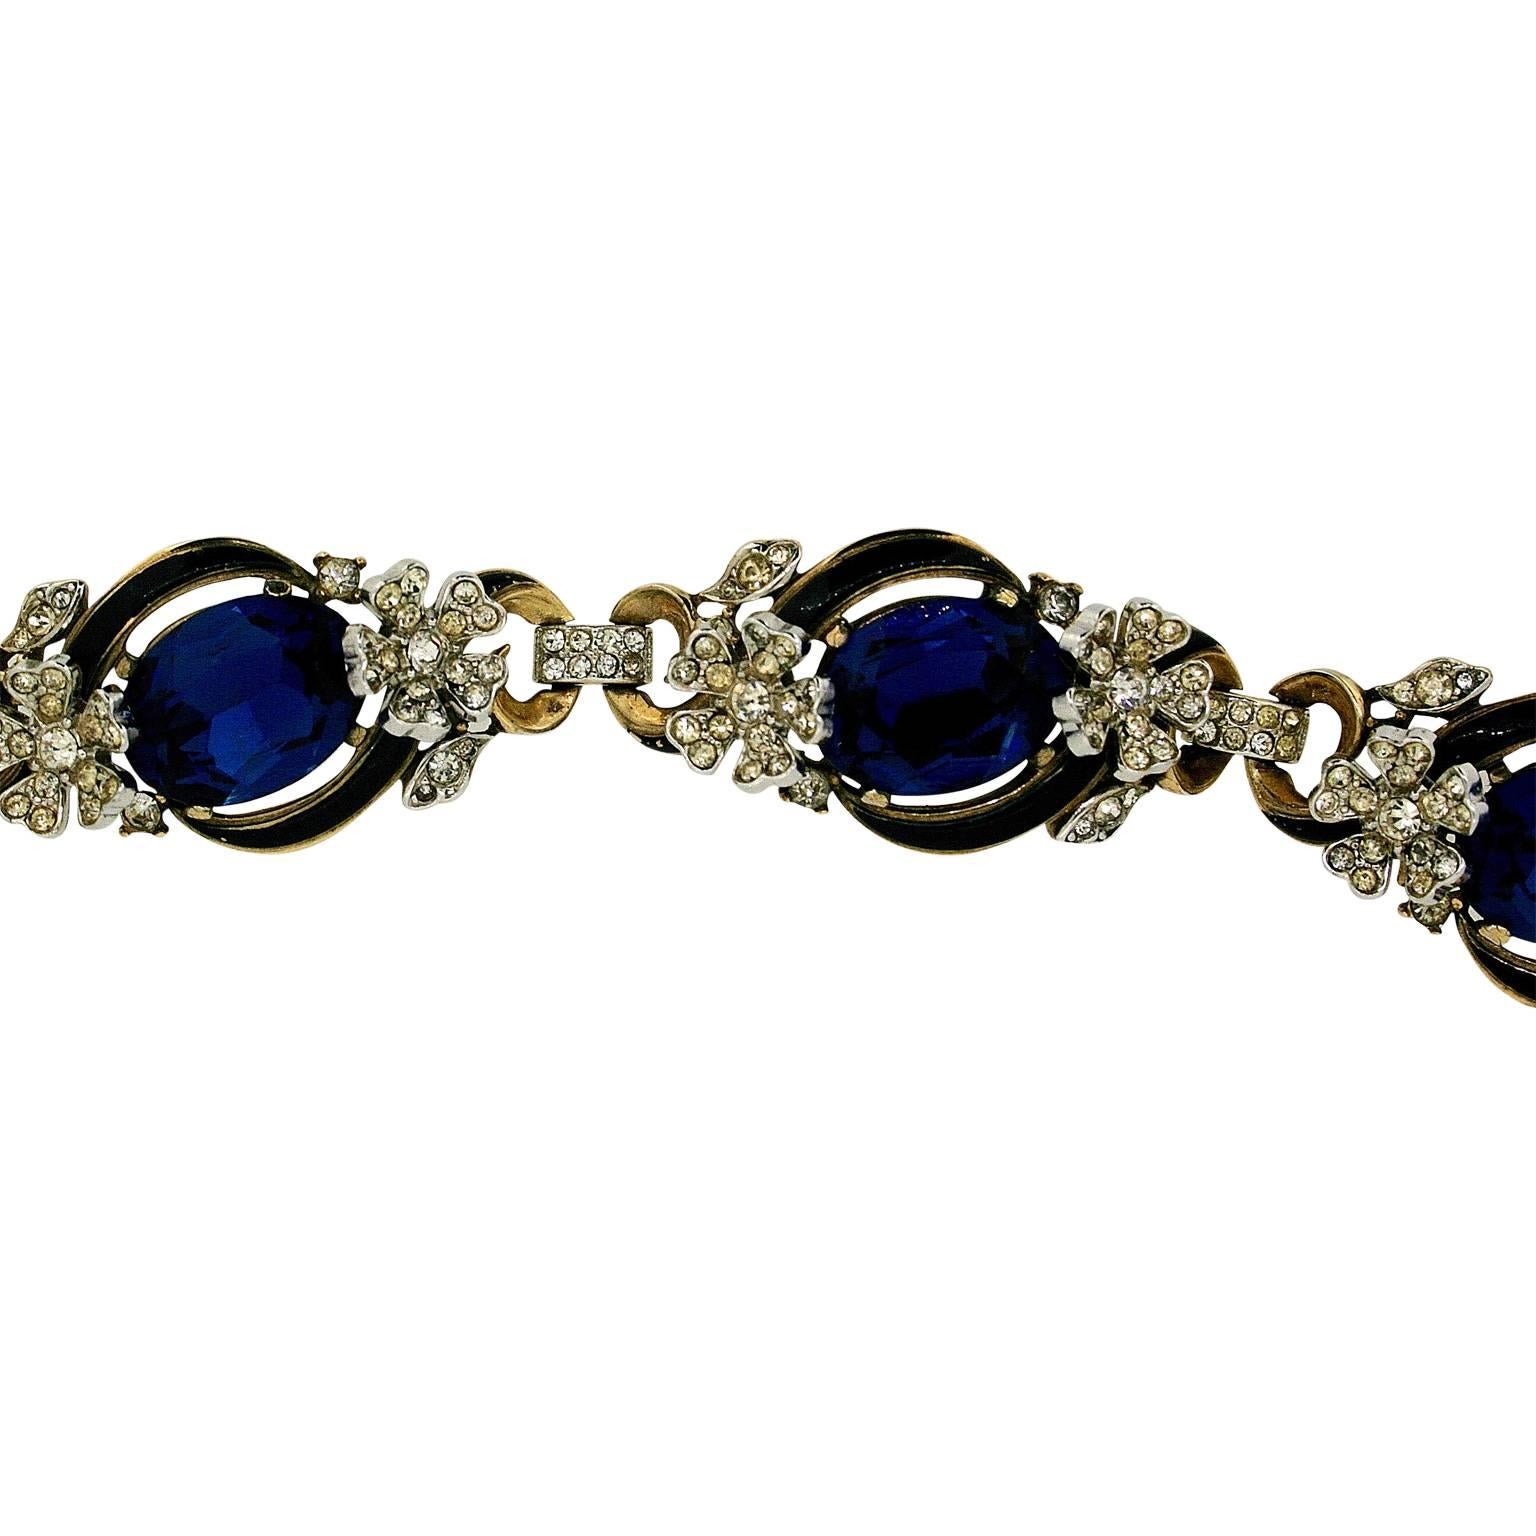 Women's Trifari 1940s Gold Vermeil and Sapphire Rhinestone with Enamel Floral Vintage Br